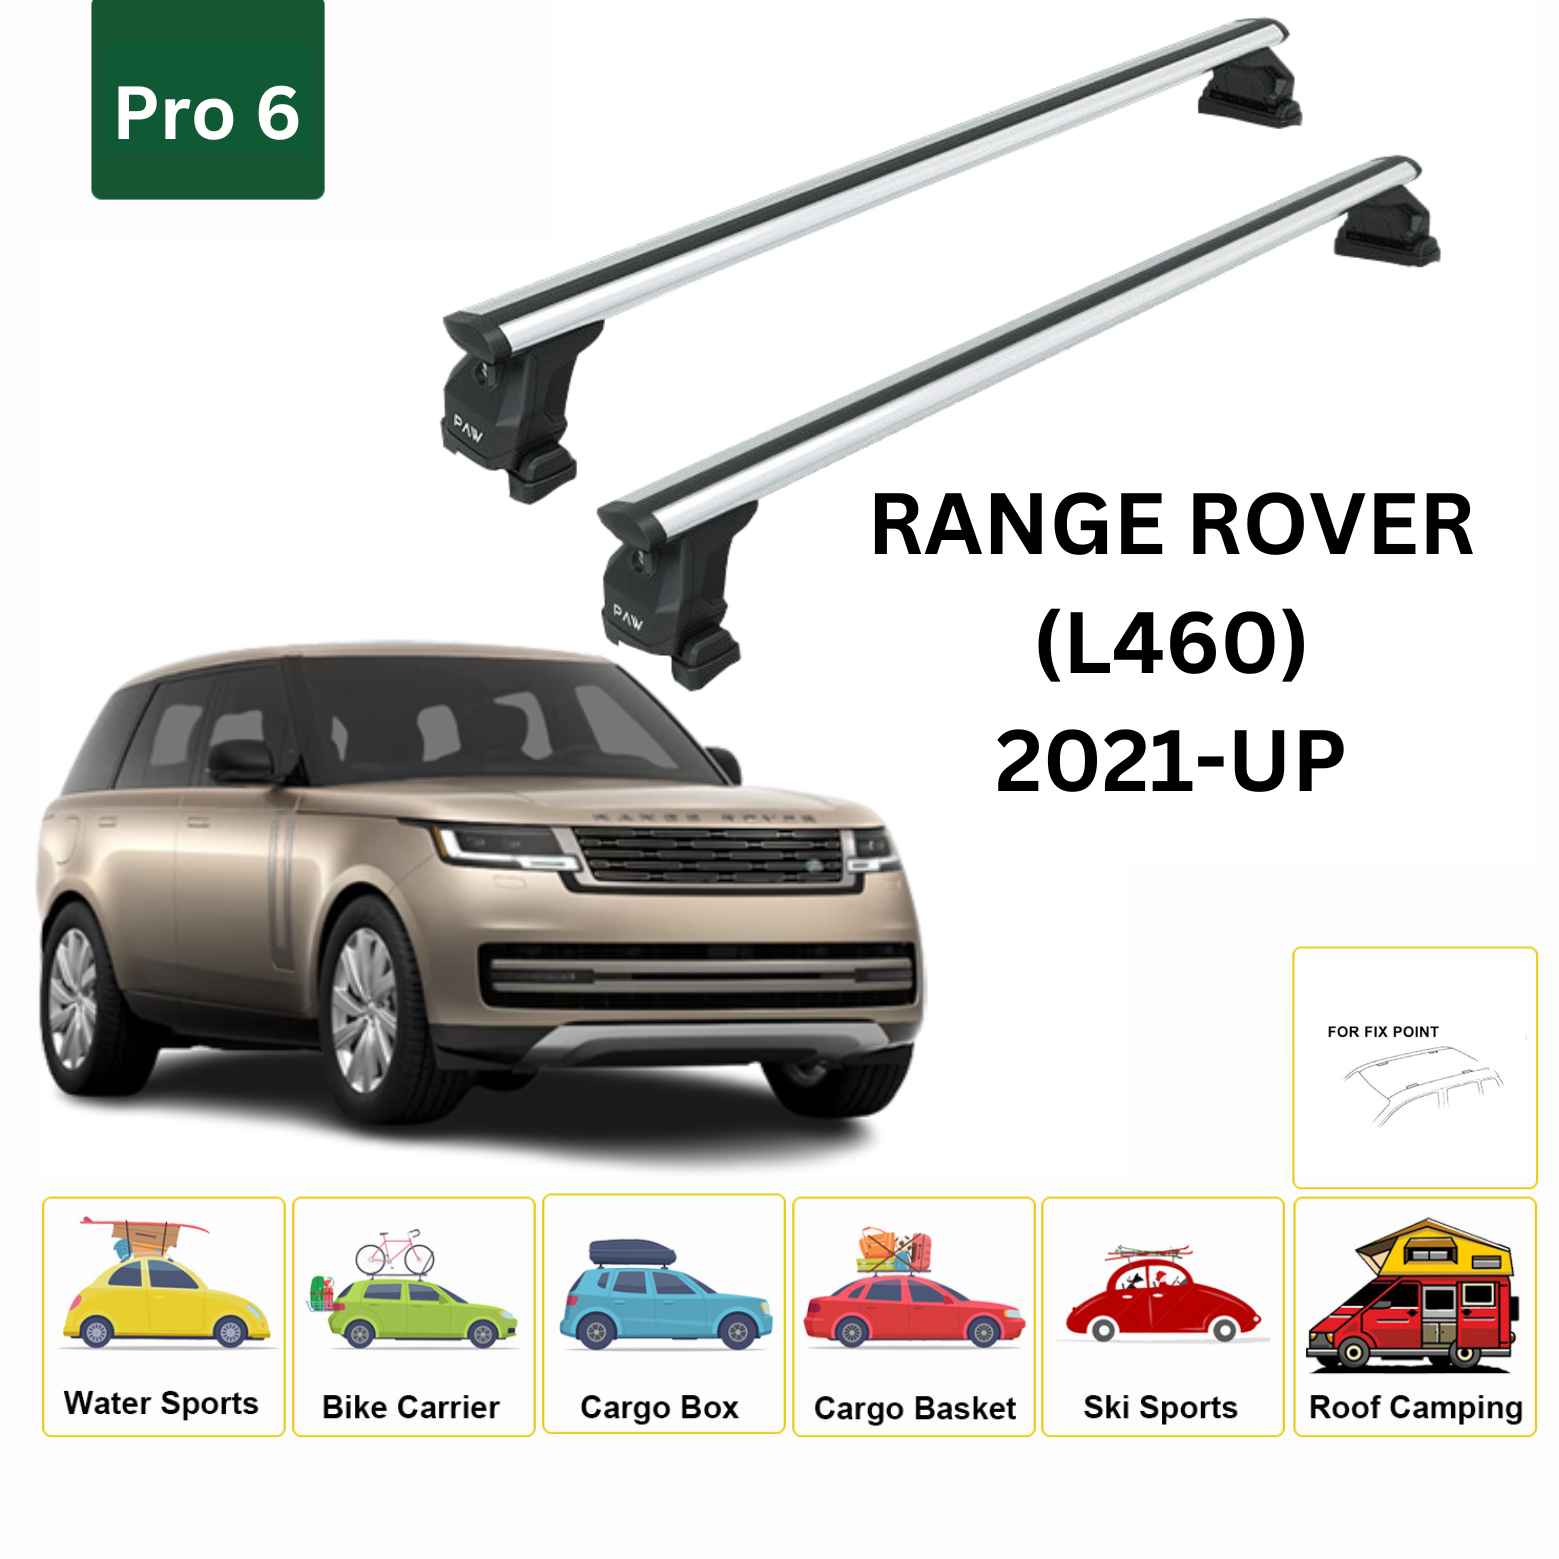 For Land Rover Range Rover (L460) 2021-Up Cross Bars Fix Point Pro 6 Alu Silver - 0